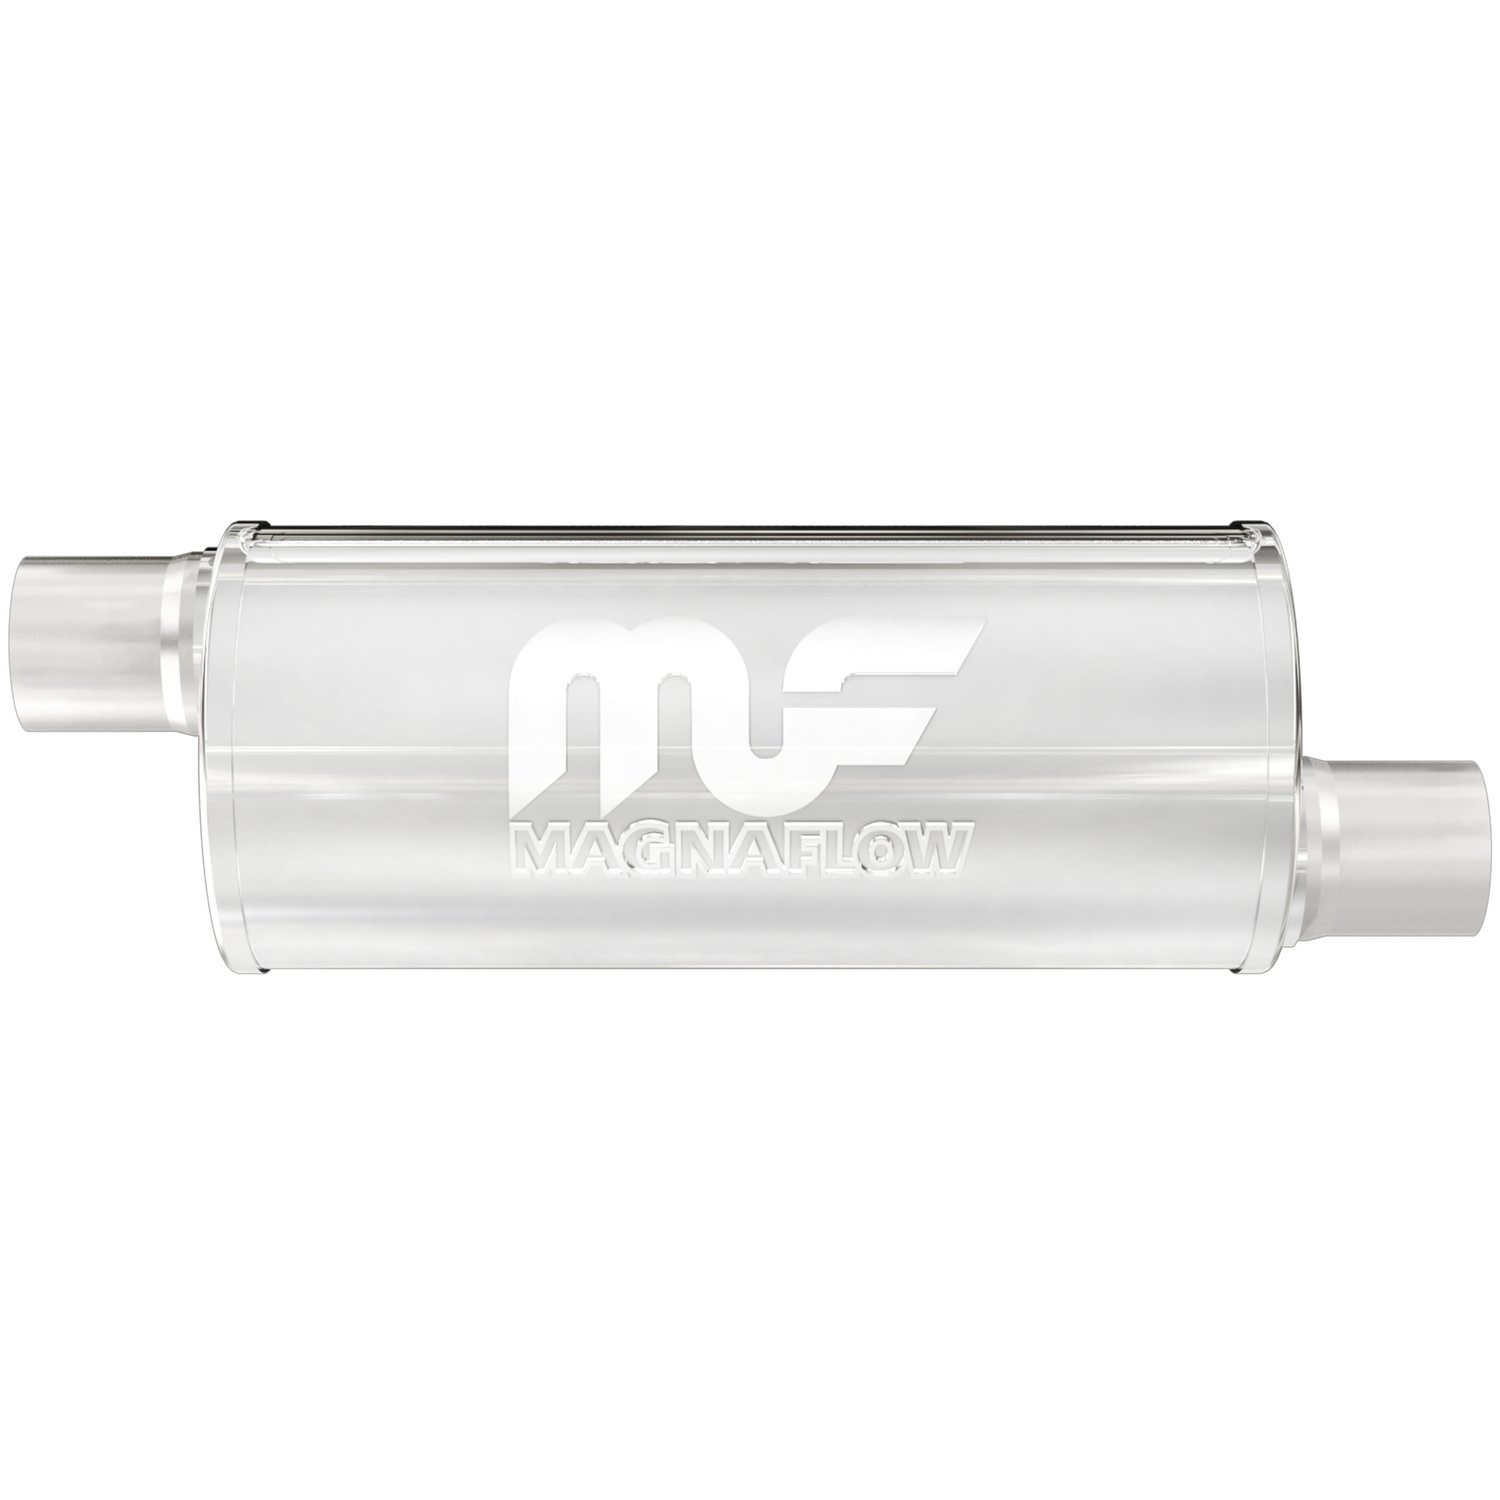 6" Round Muffler Offset In/Offset Out: 2.25"/2.25" Body Length: 14" Overall Length: 20" Core Size: 2.5" Satin Finish